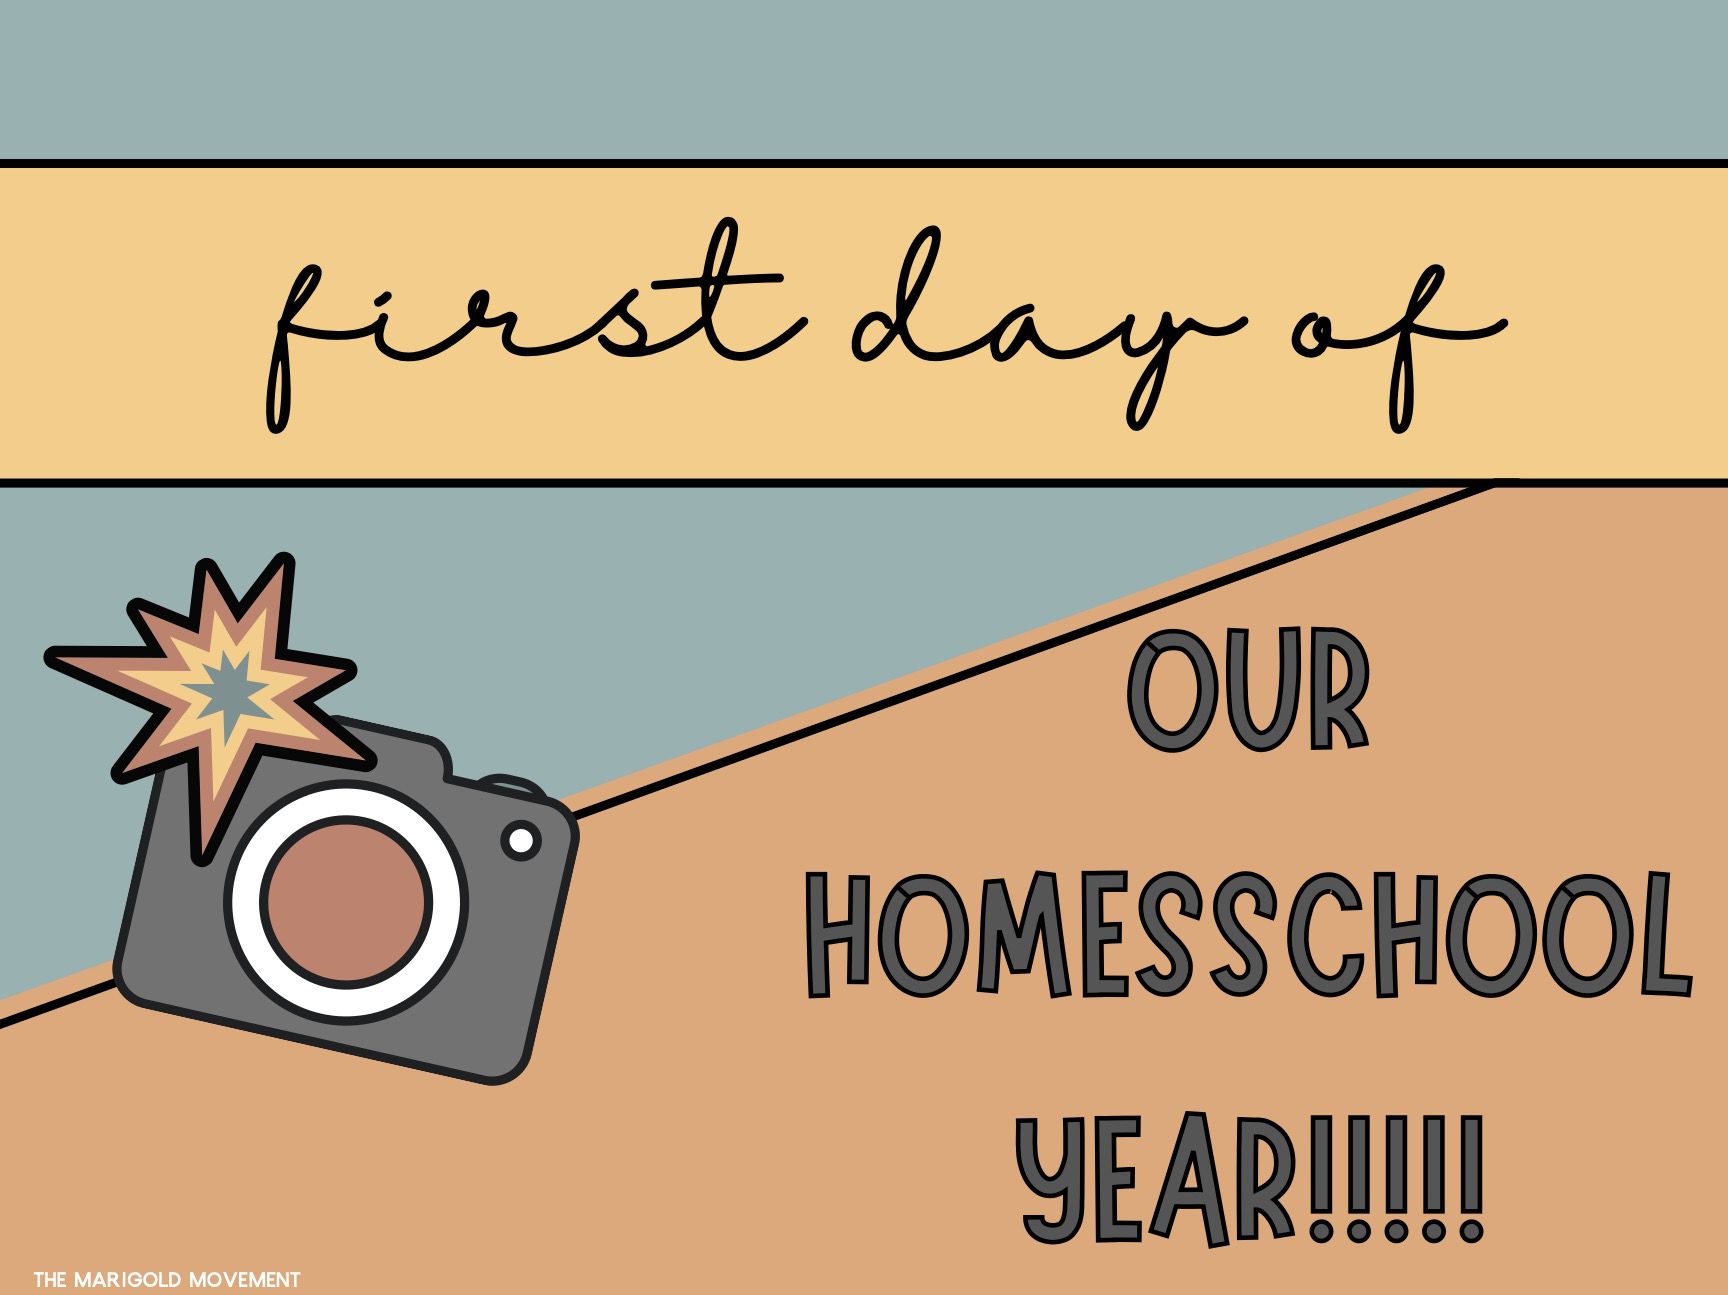 "First day of our homeschool year!!!" graphic